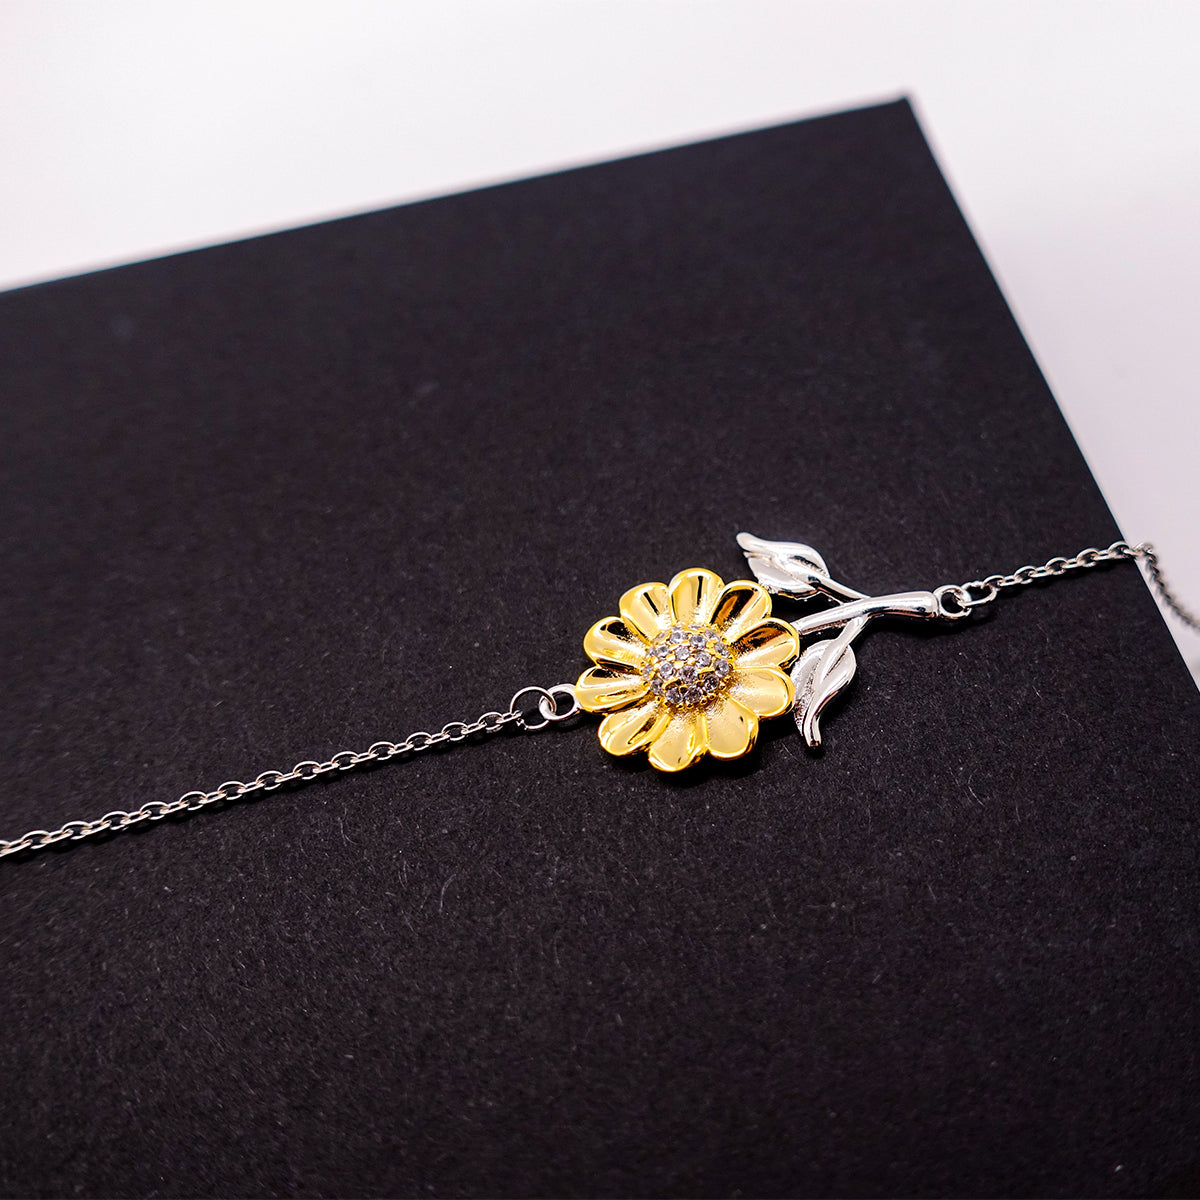 Godmom Sunflower Bracelet - Keepsake Gift for Special Godmom, Engraved with Hope and Love, Perfect for Birthday, Christmas, Graduation, and More